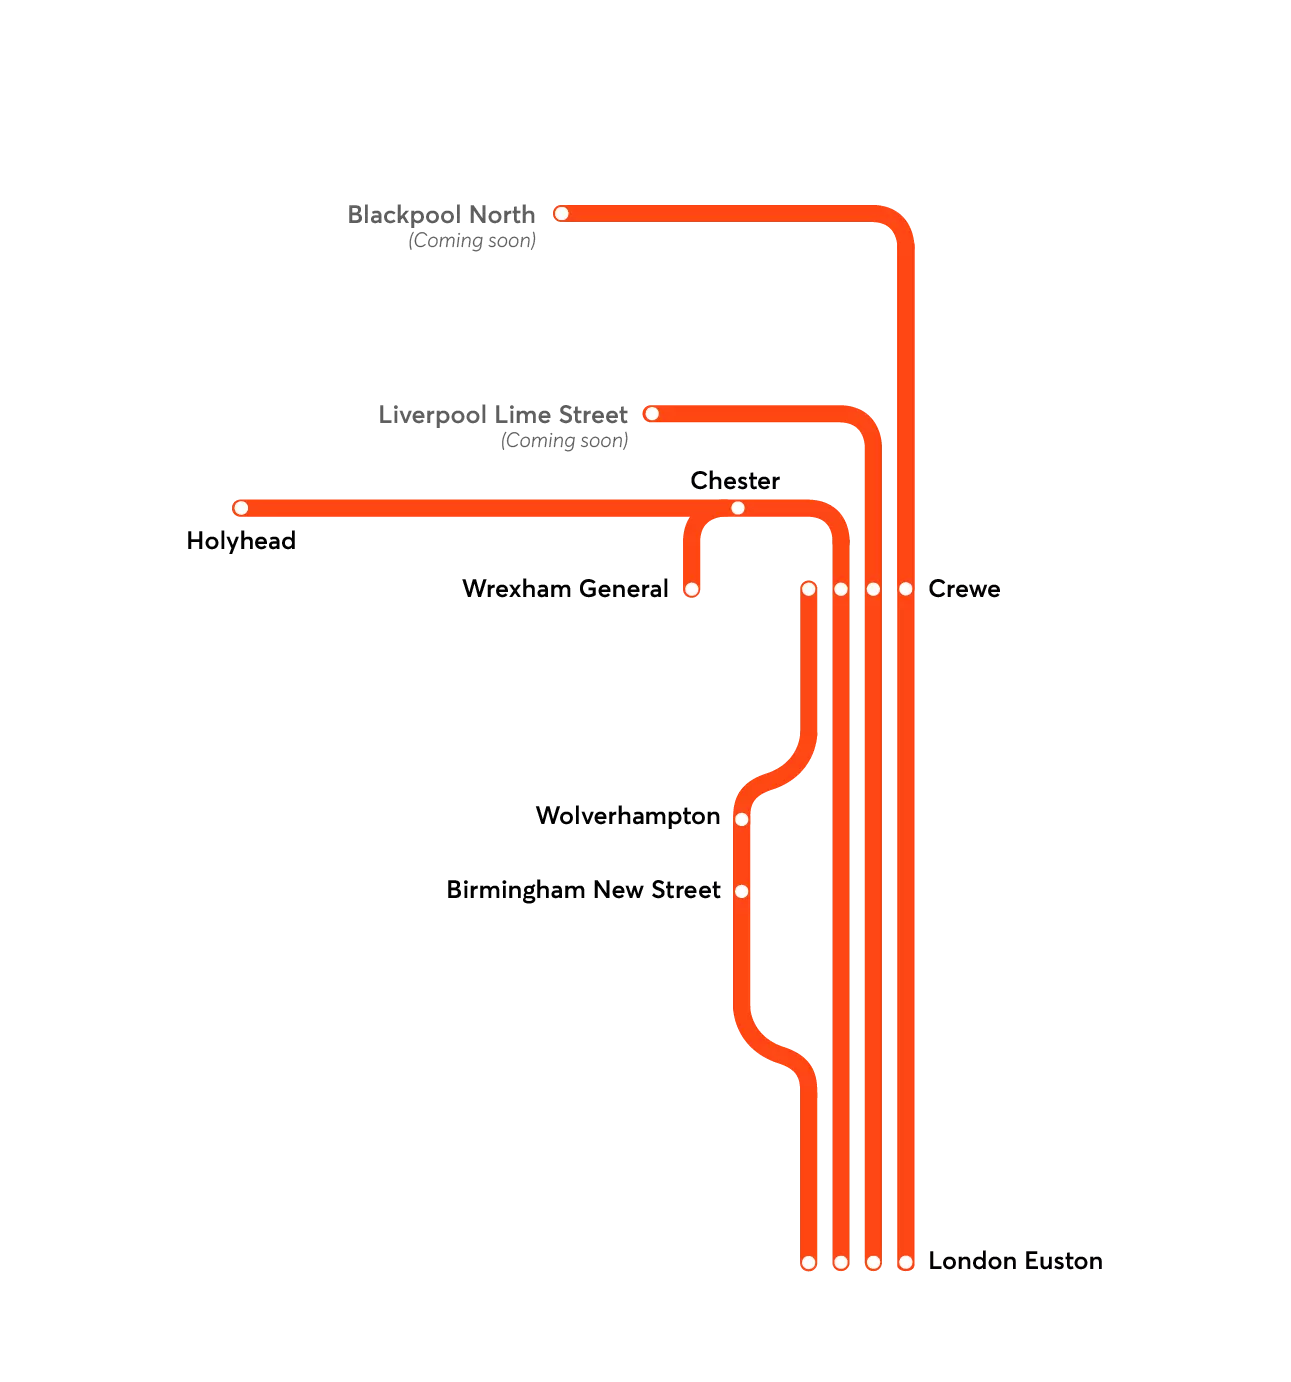 A route map showing station stops between London Euston and Liverpool, Holyhead and Blackpool superimposed on blurred countryside with the train running below.